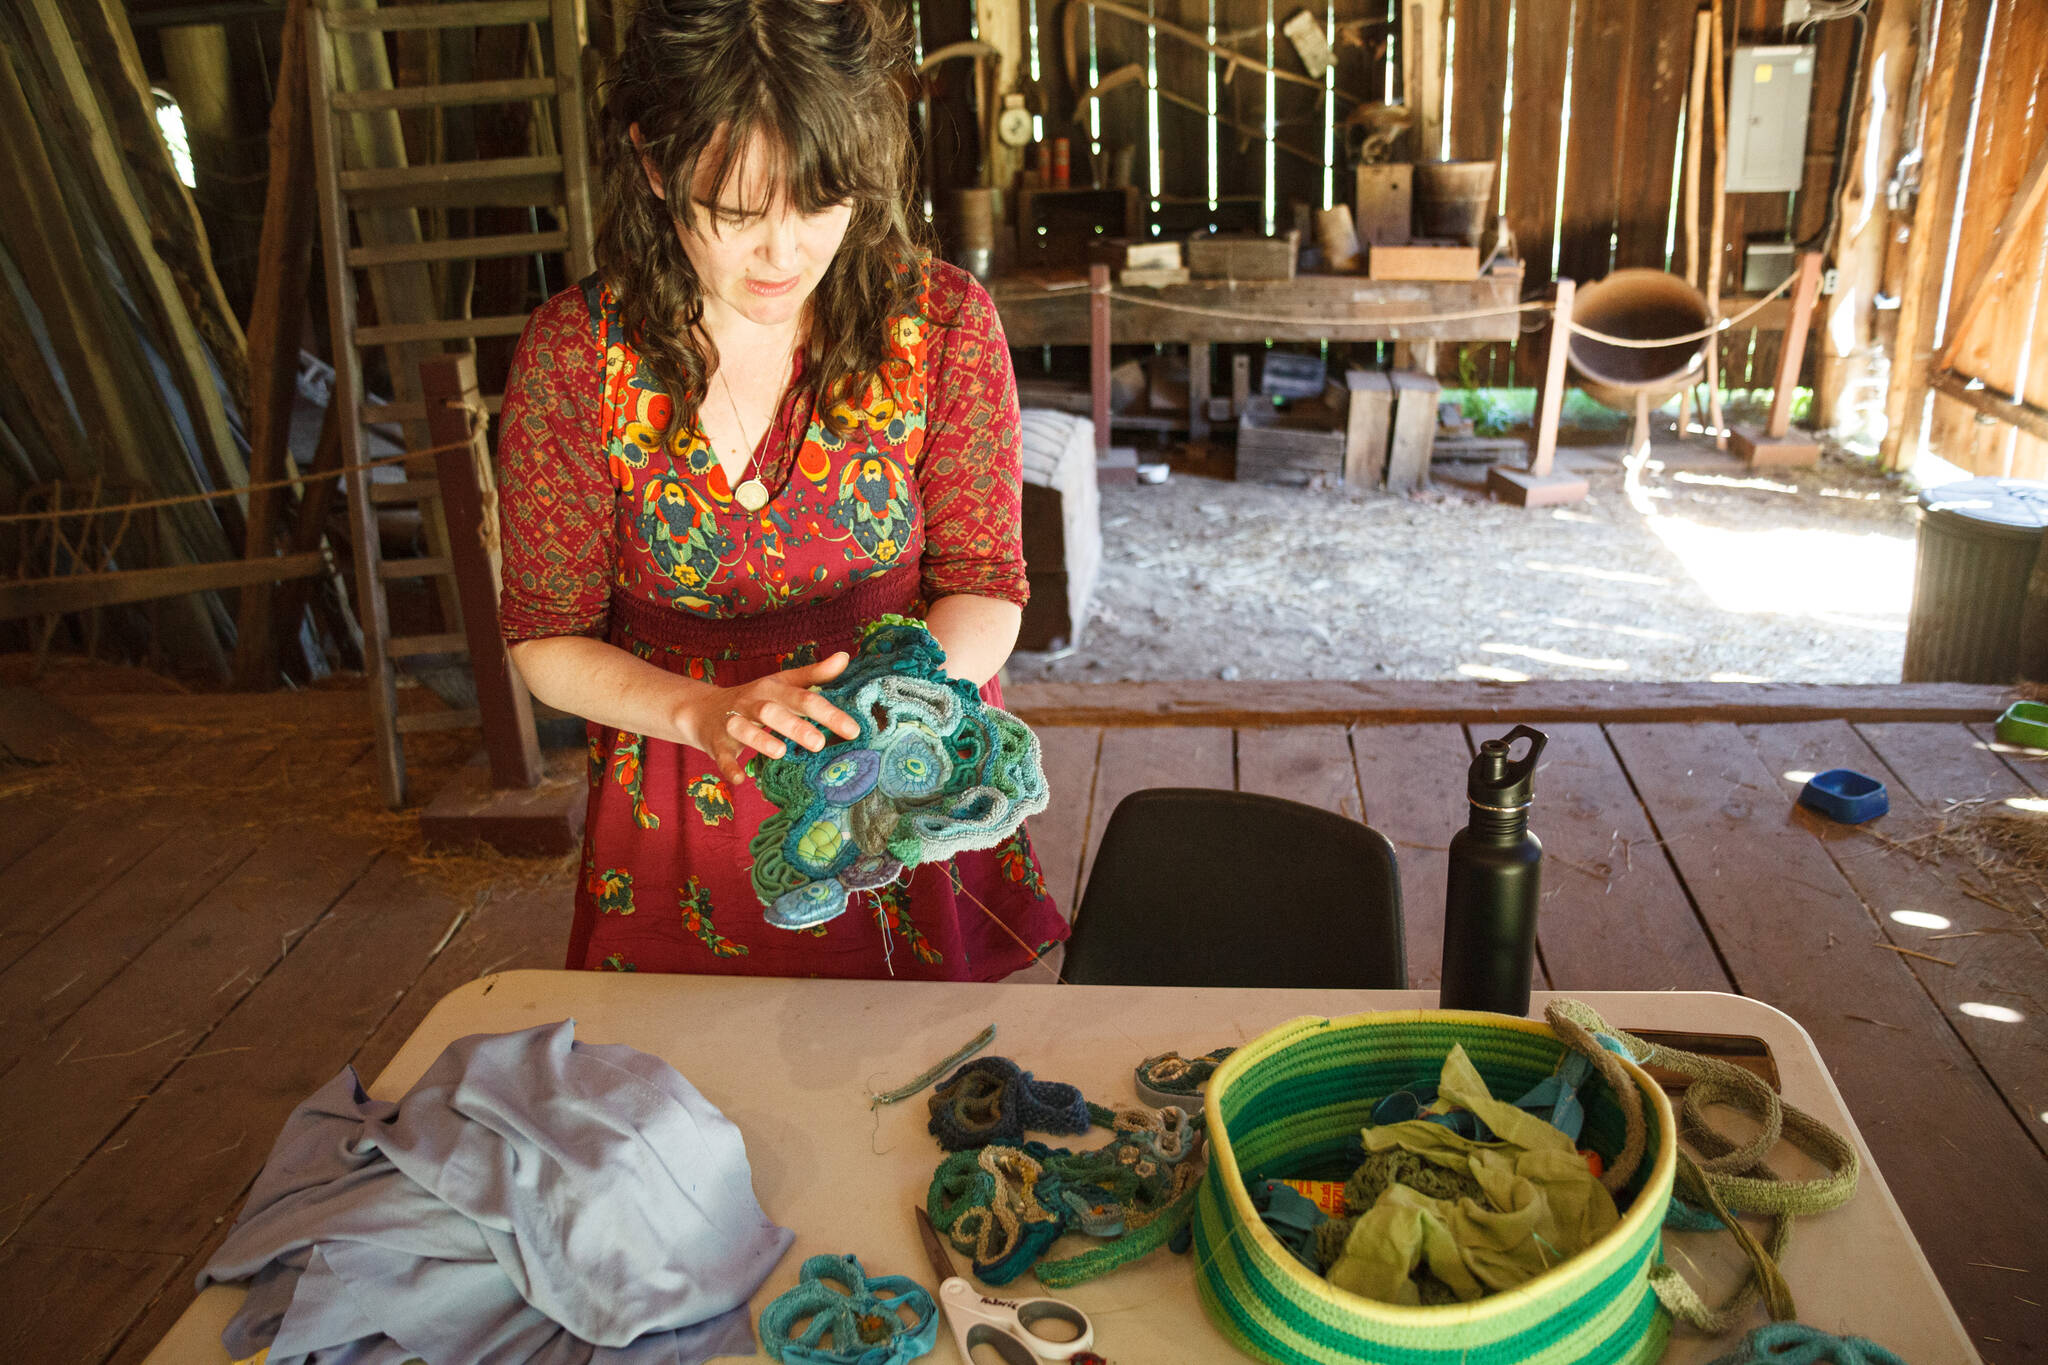 Amanda Triplett, Mary Olson Farm's current Artist in Residence, explains the process of creating textile sculptures from scrap fabrics. Photo by Henry Stewart-Wood/Sound Publishing